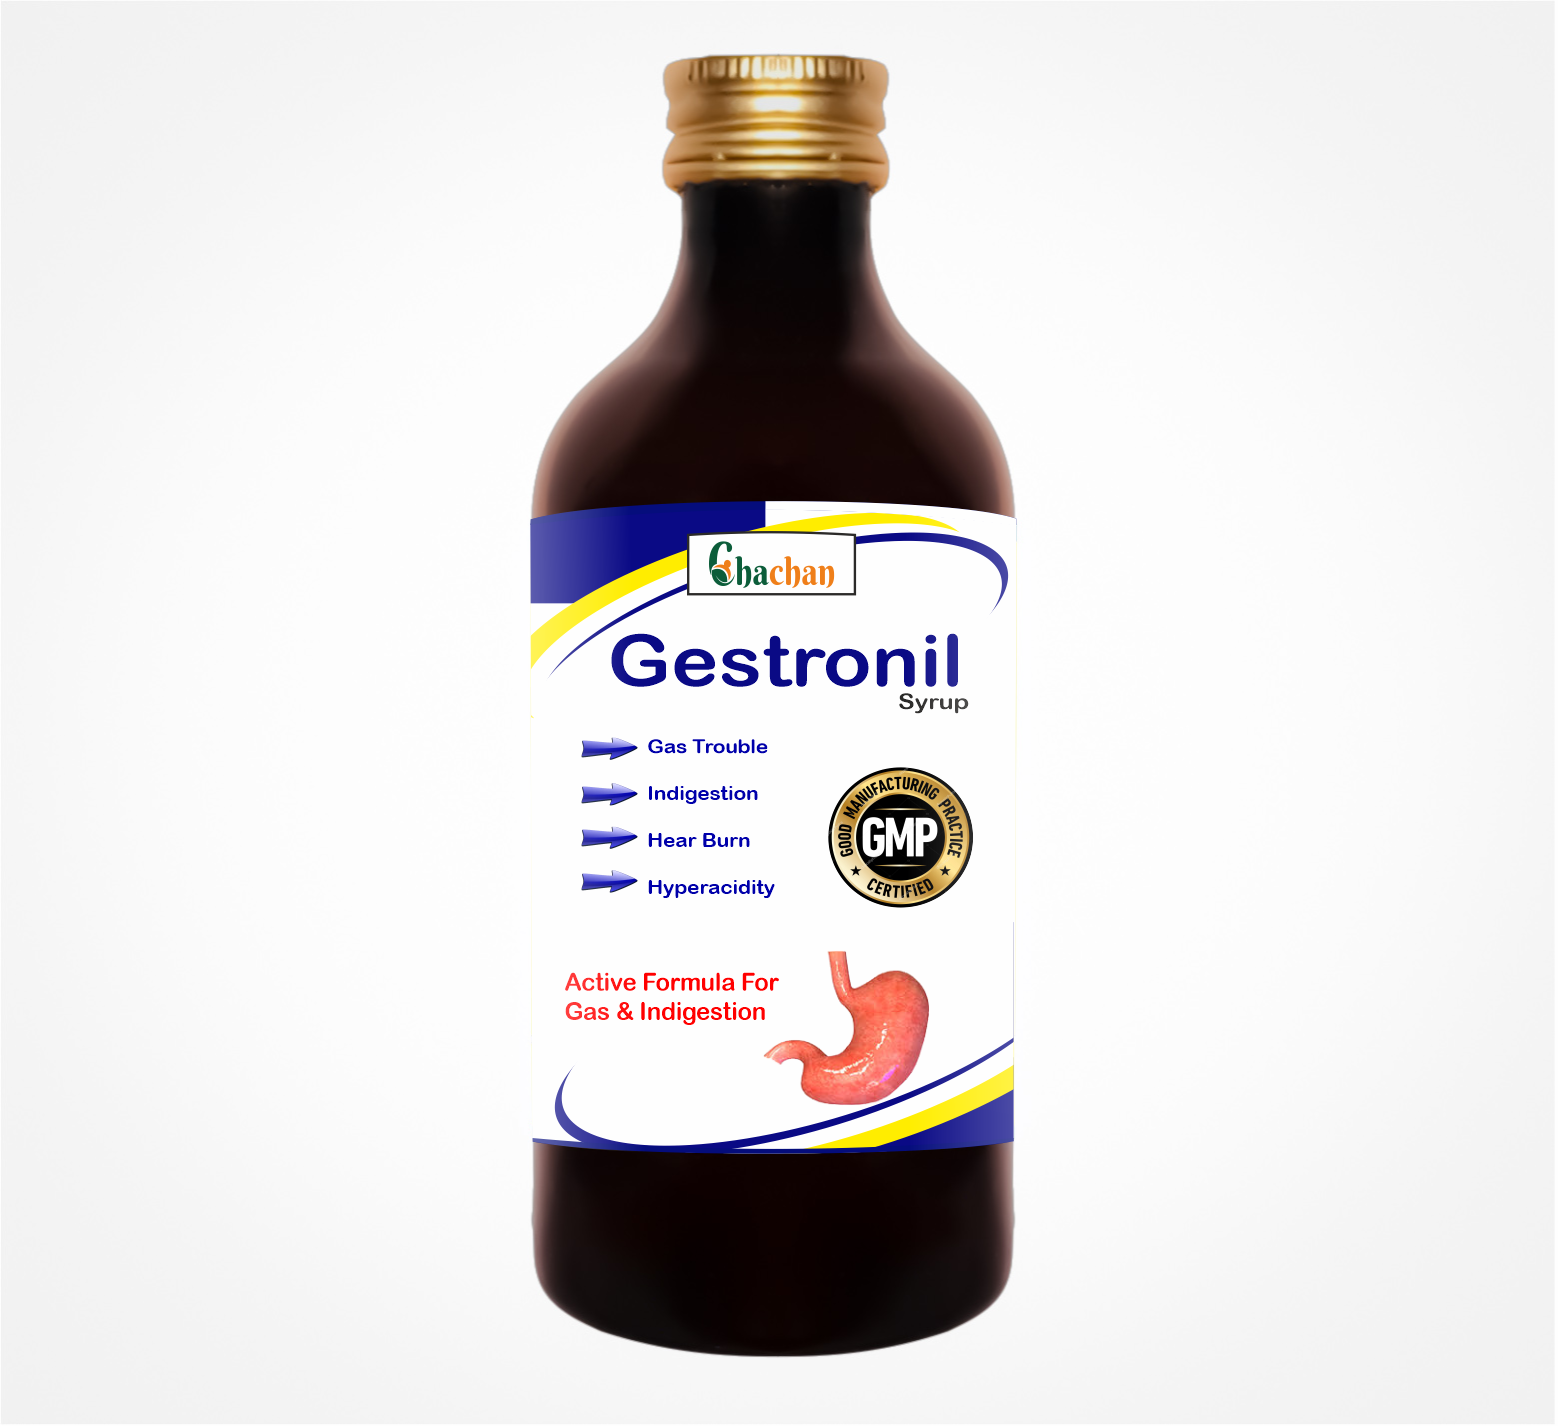 CHACHAN GESTRONIL SYRUP